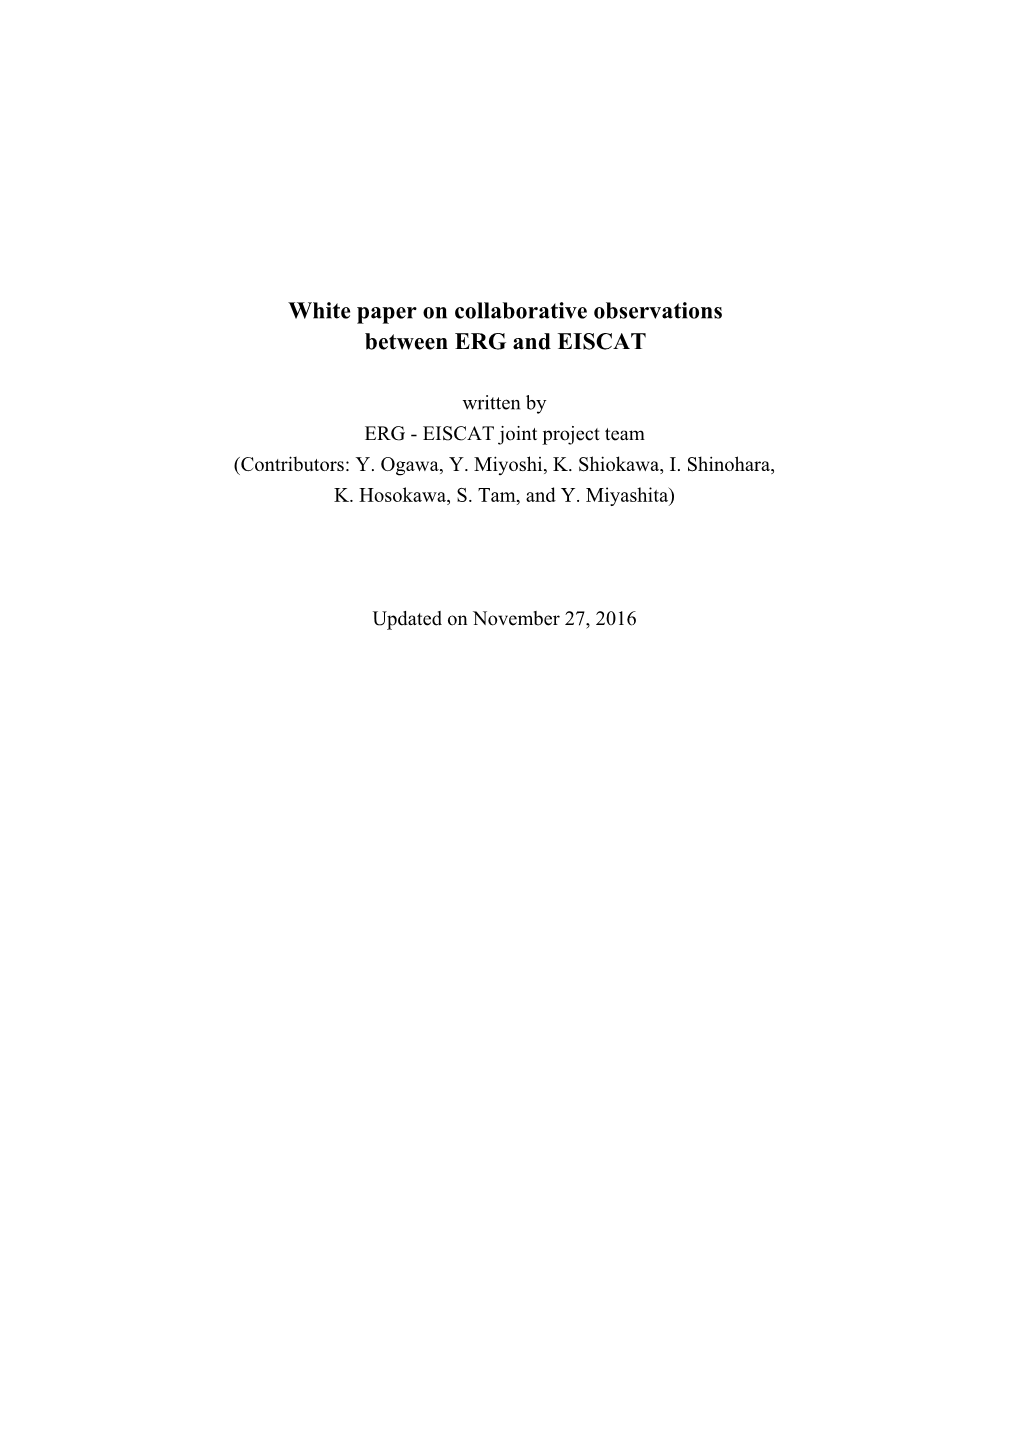 White Paper on Collaborative Observations Between ERG and EISCAT